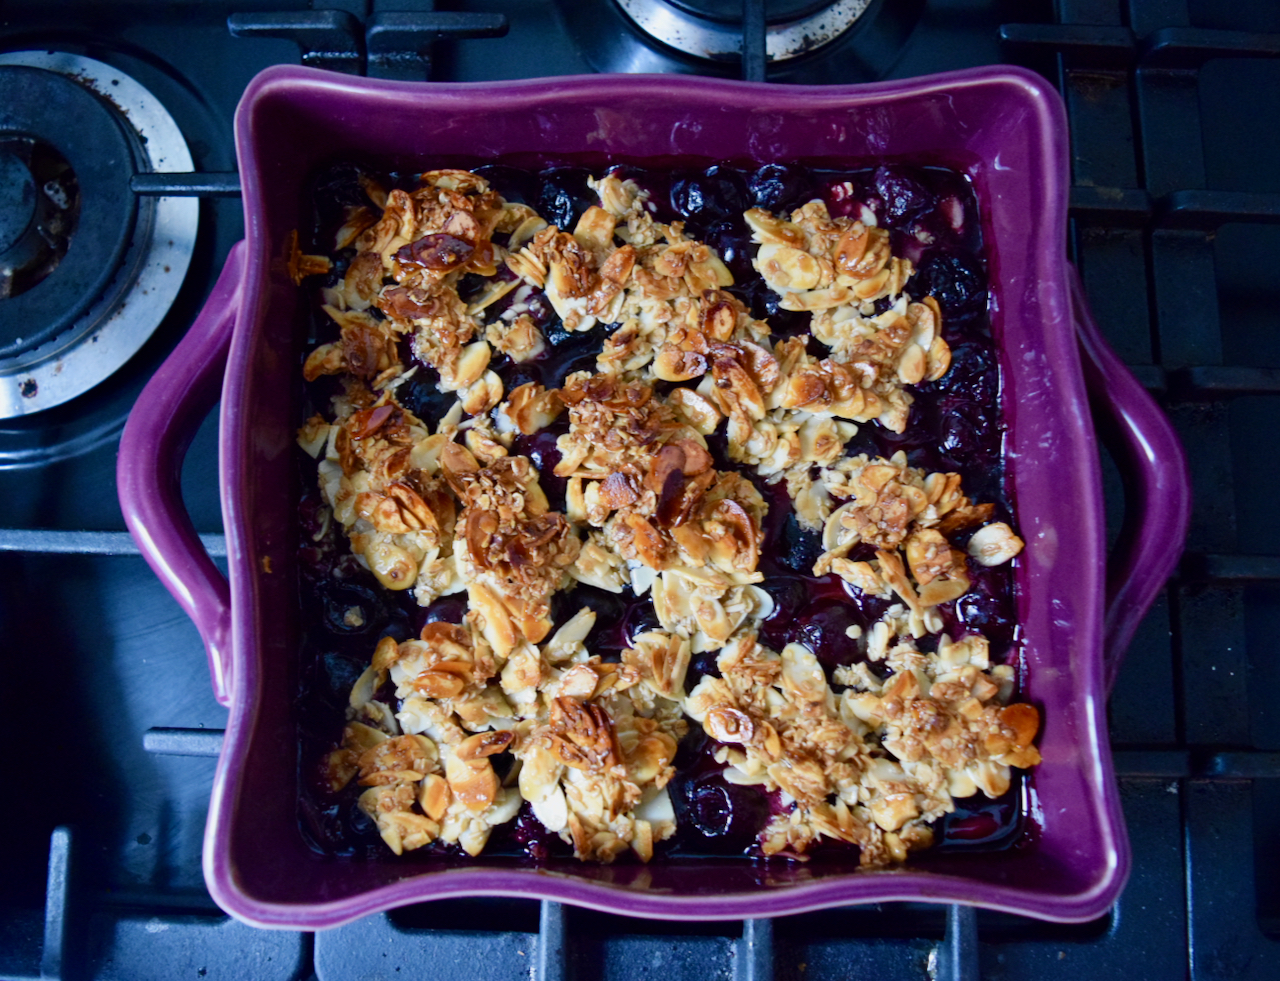 Cherry Almond Crisp recipe from Lucy Loves Food Blog